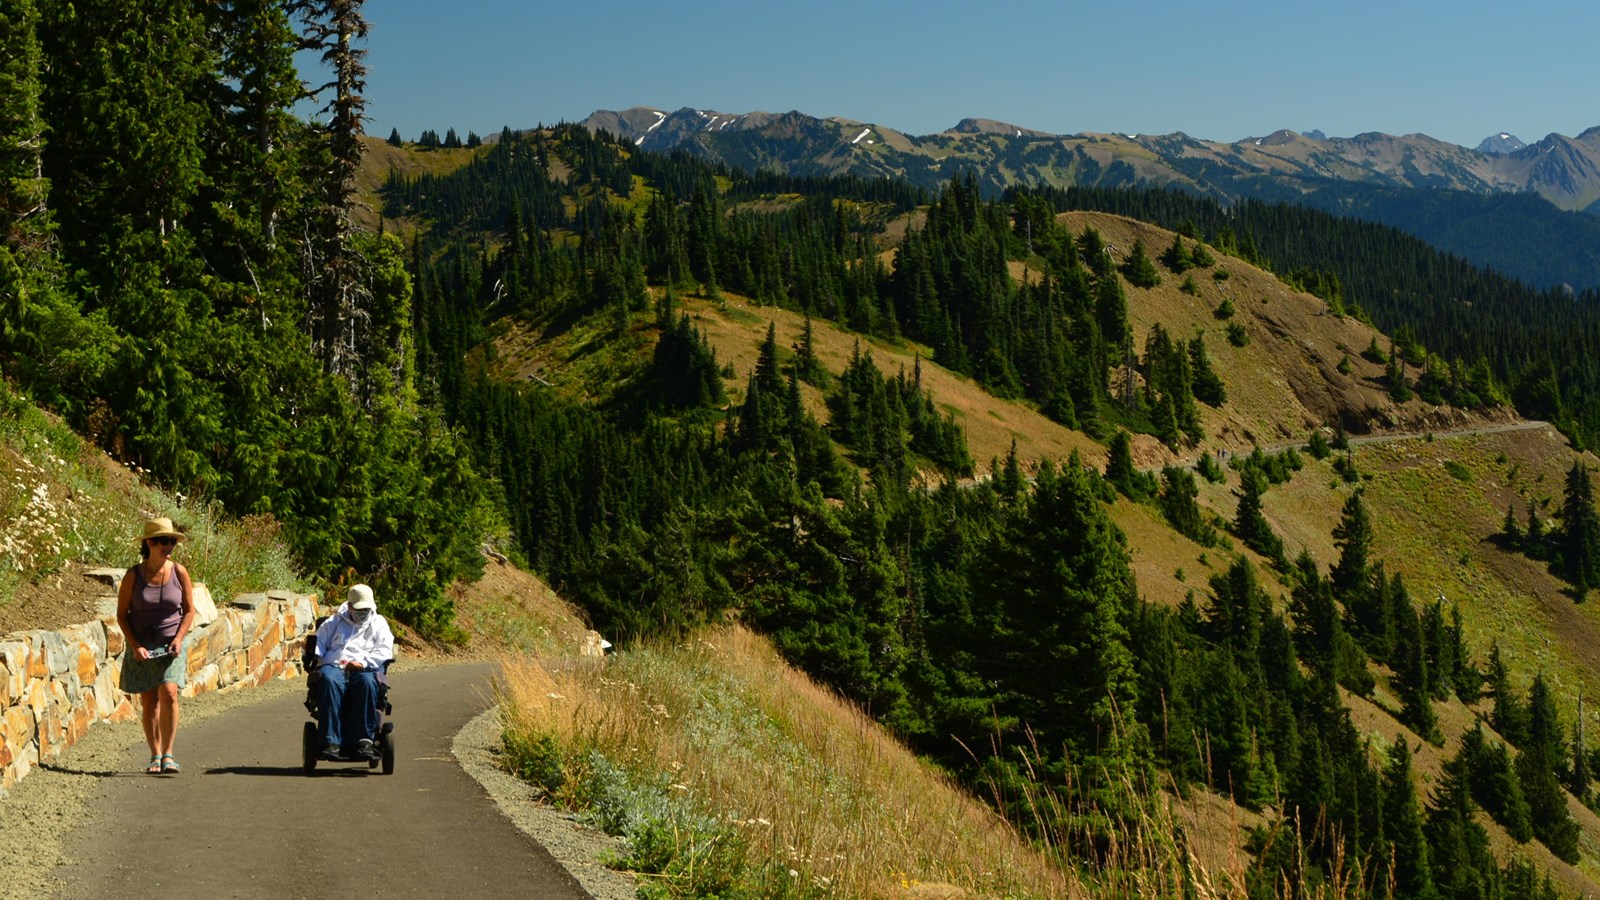 A hiker and wheelchair user on a paved trail with mountains in the background.